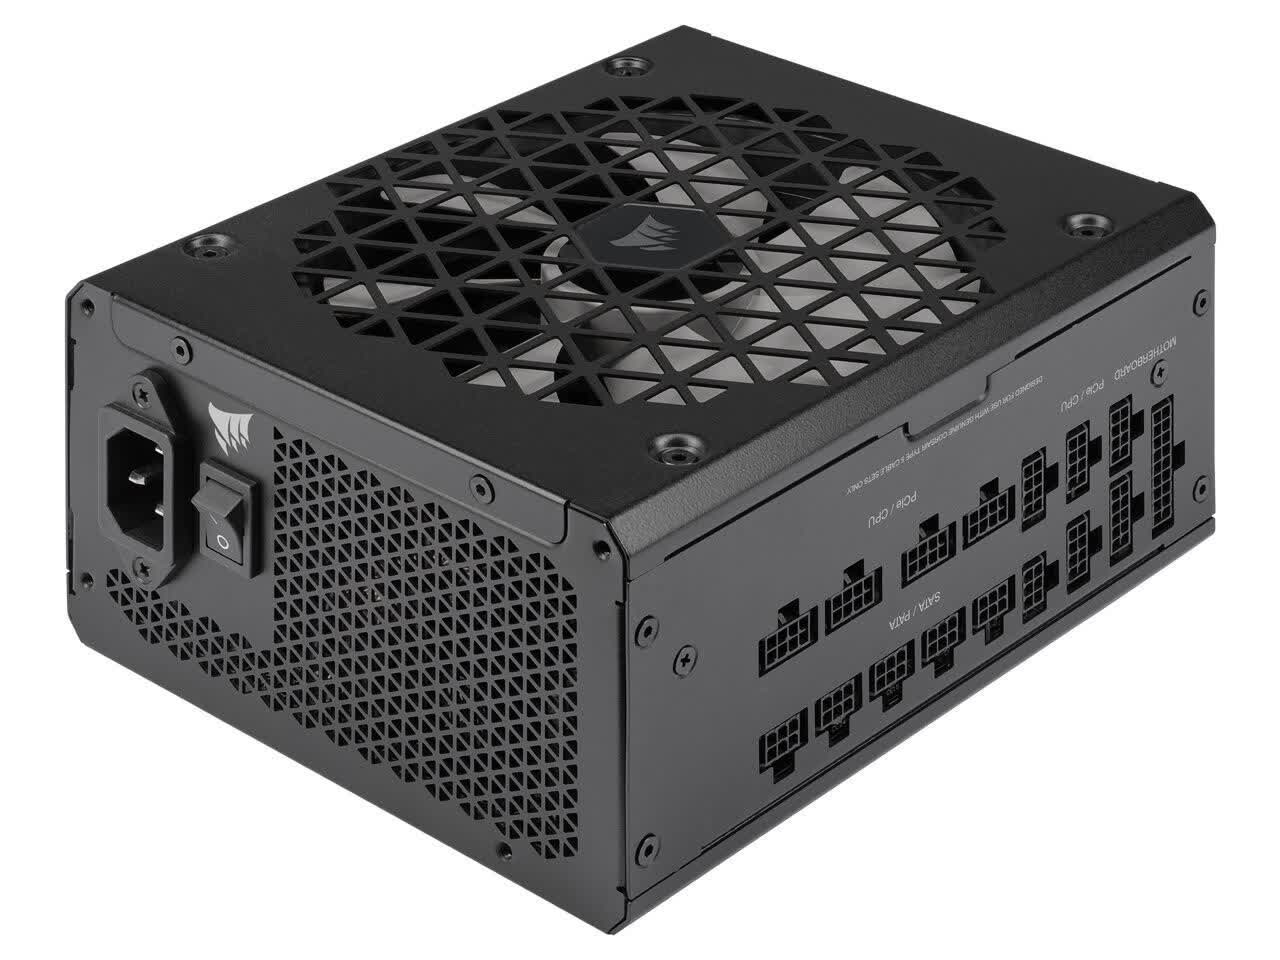 Corsair creates new PSU with side-mounted power connectors